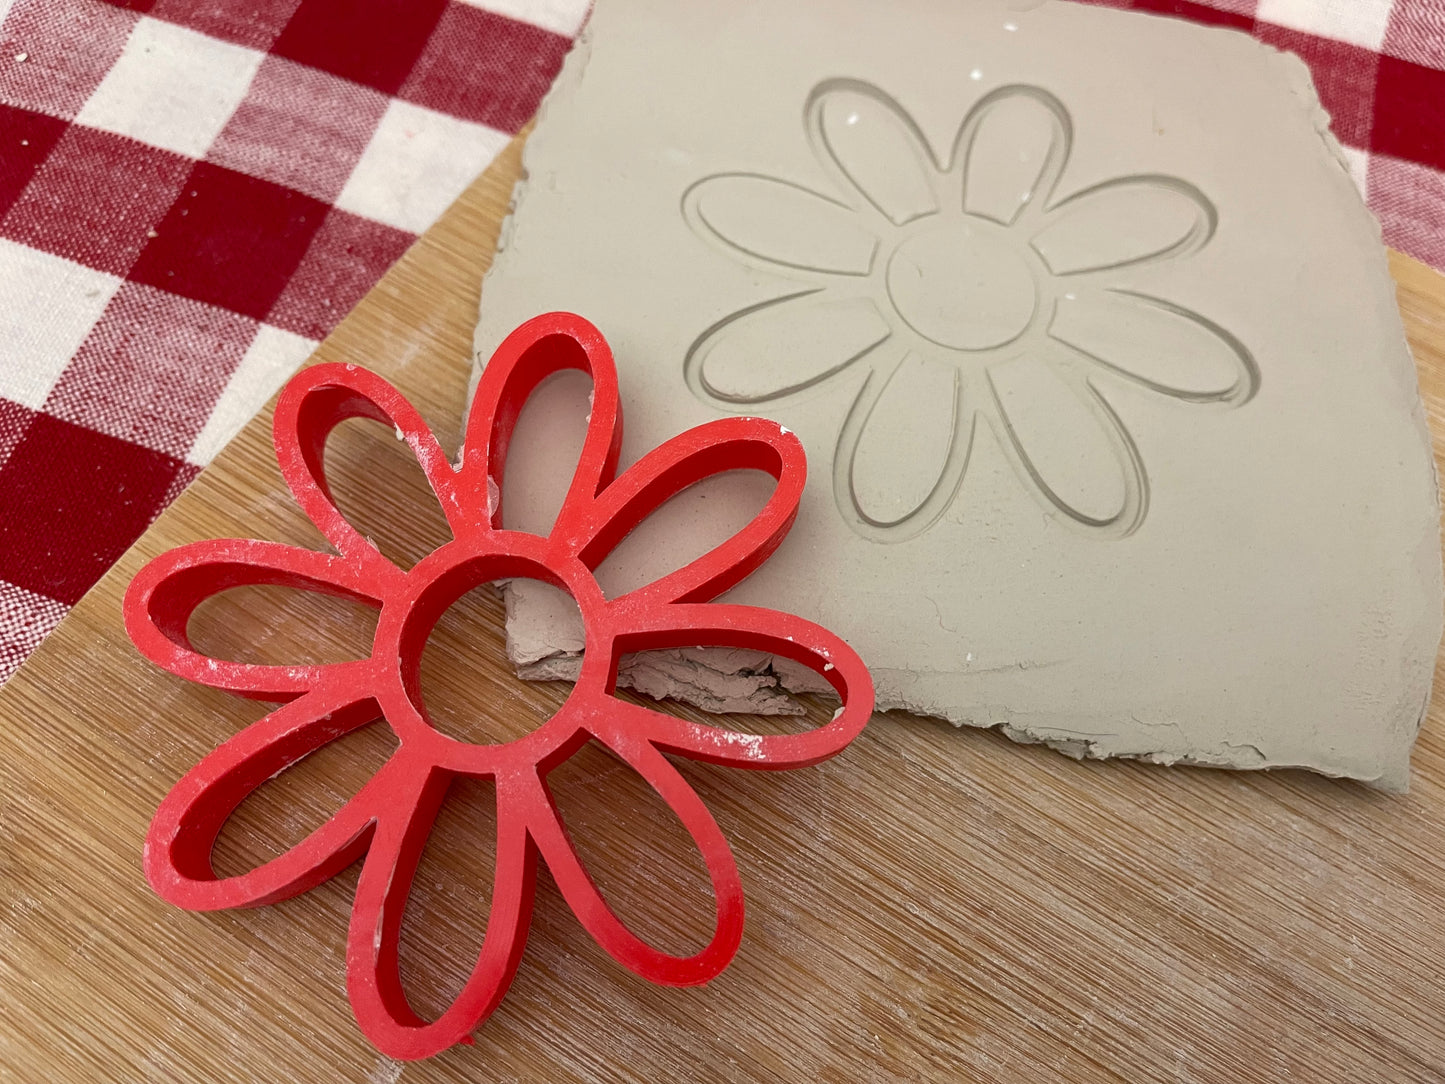 Pottery Stamp, Groovy Daisy design - multiple sizes available, plastic 3D printed